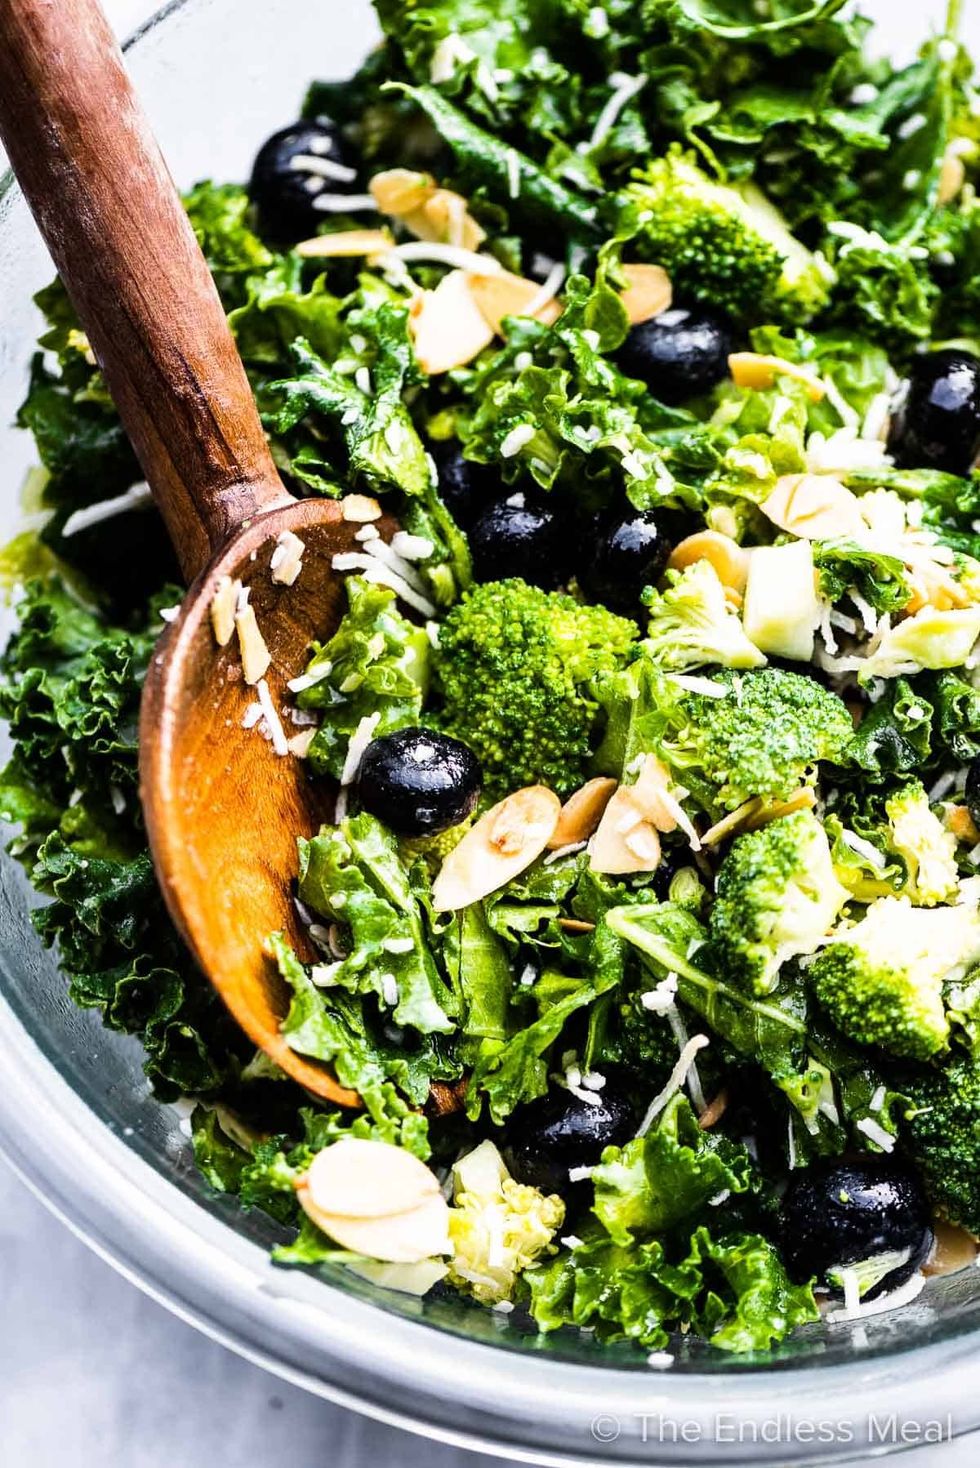 Broccoli Kale Salad with Blueberries and Coconut